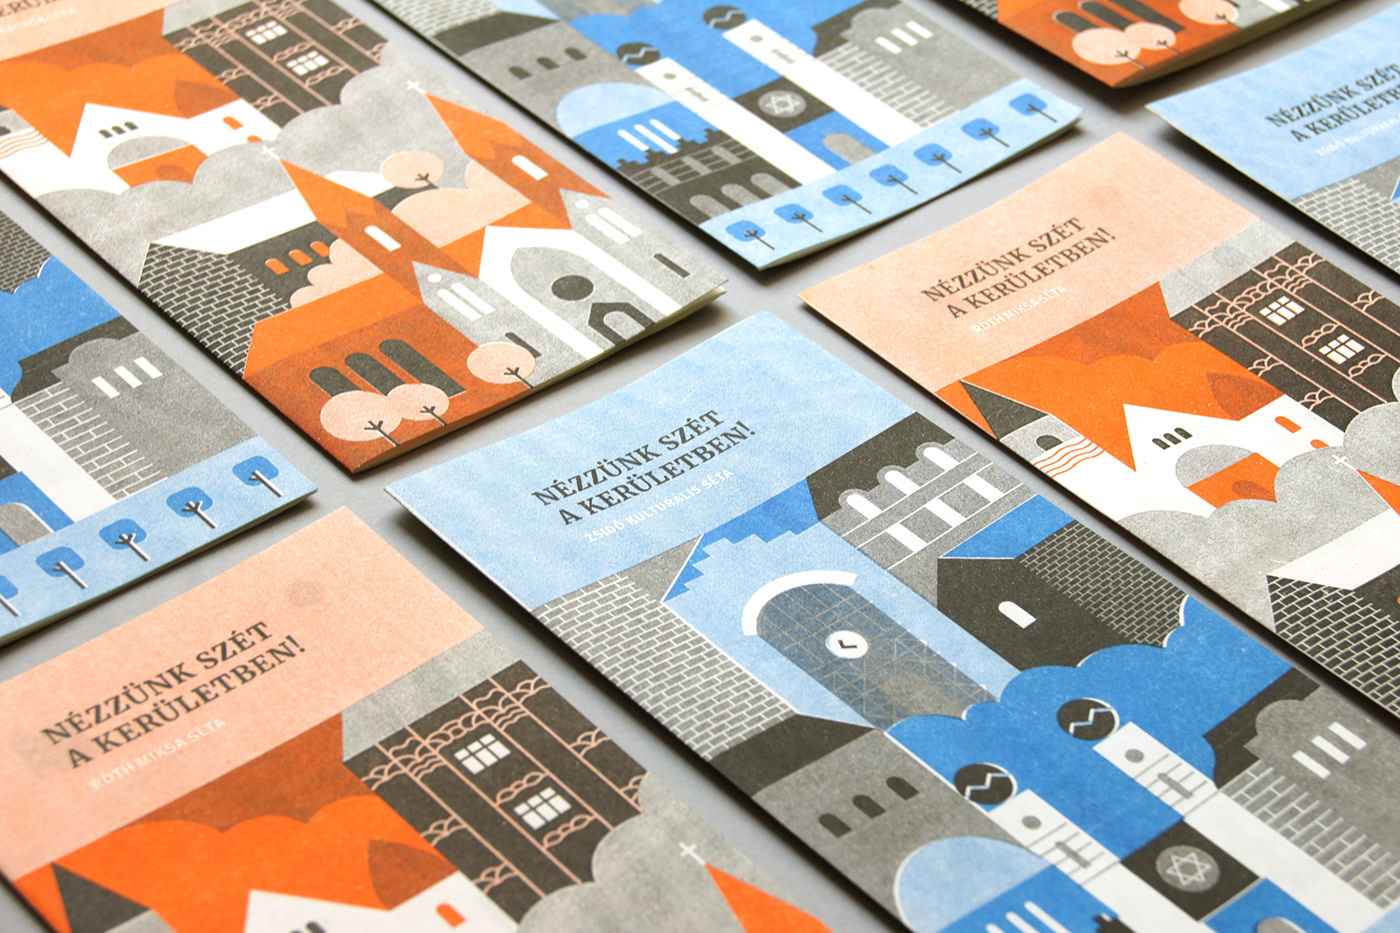 City Guides - Budapest on Behance